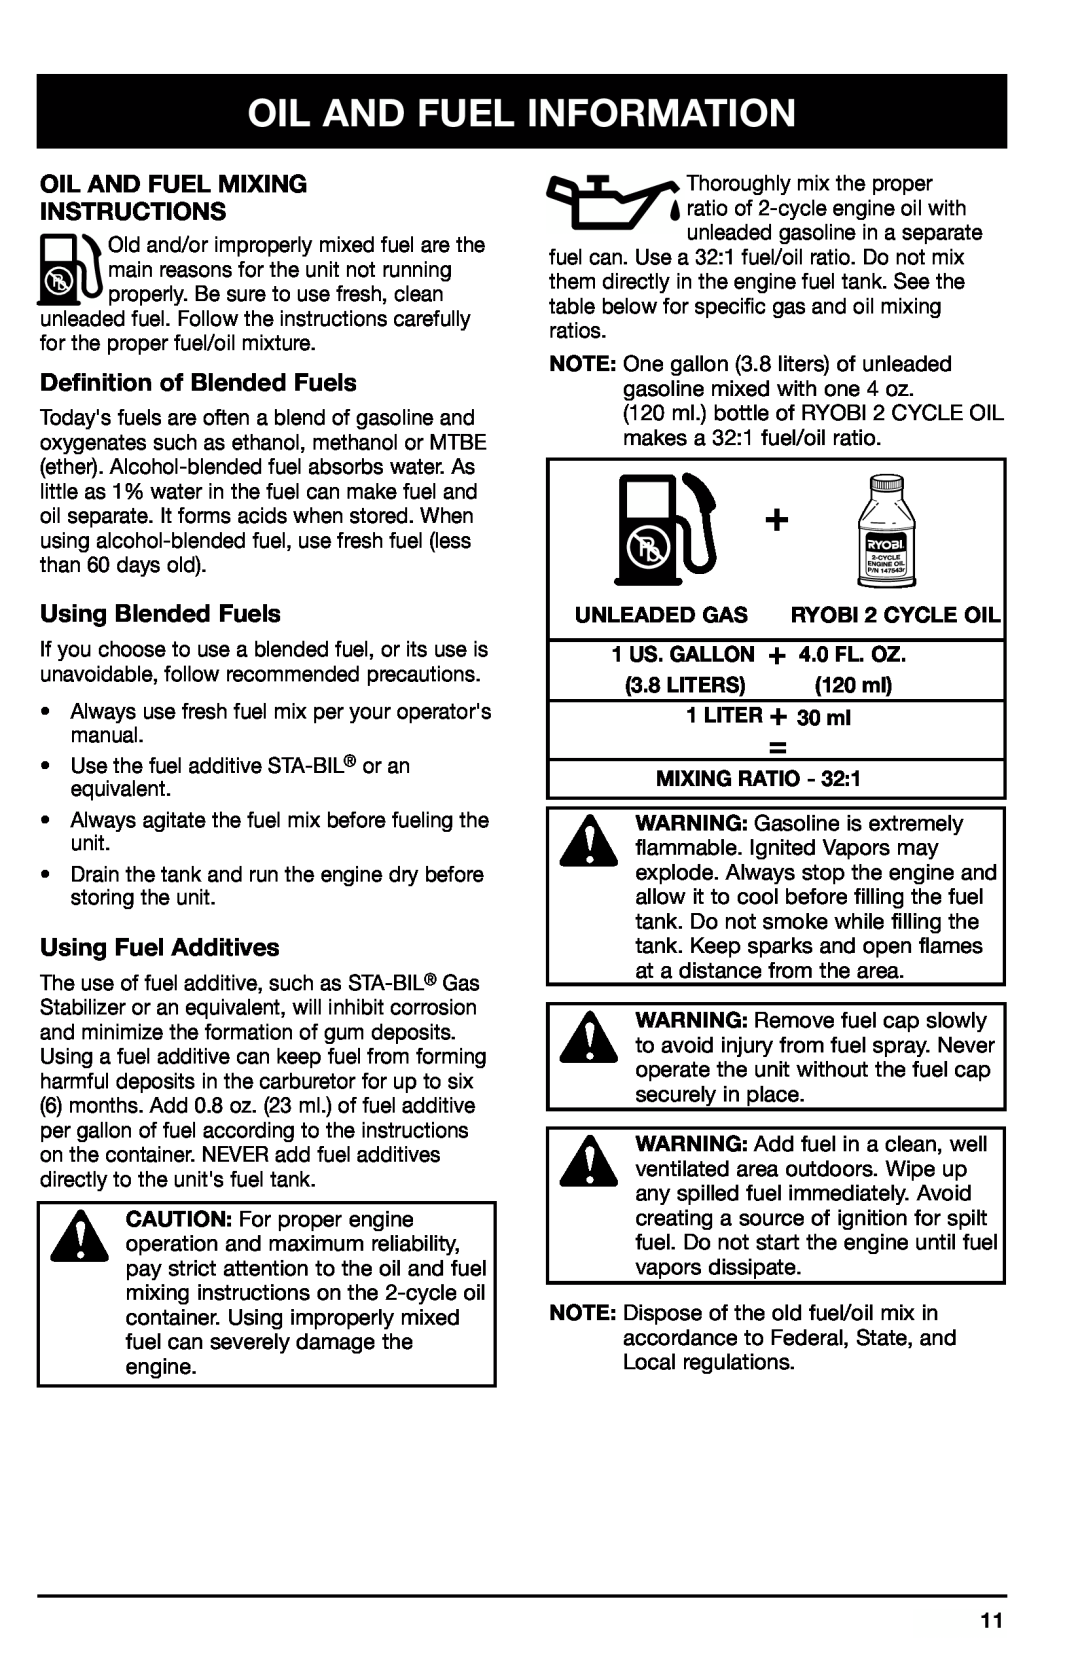 Ryobi 700r Oil And Fuel Information, Oil And Fuel Mixing Instructions, Definition of Blended Fuels, Using Blended Fuels 